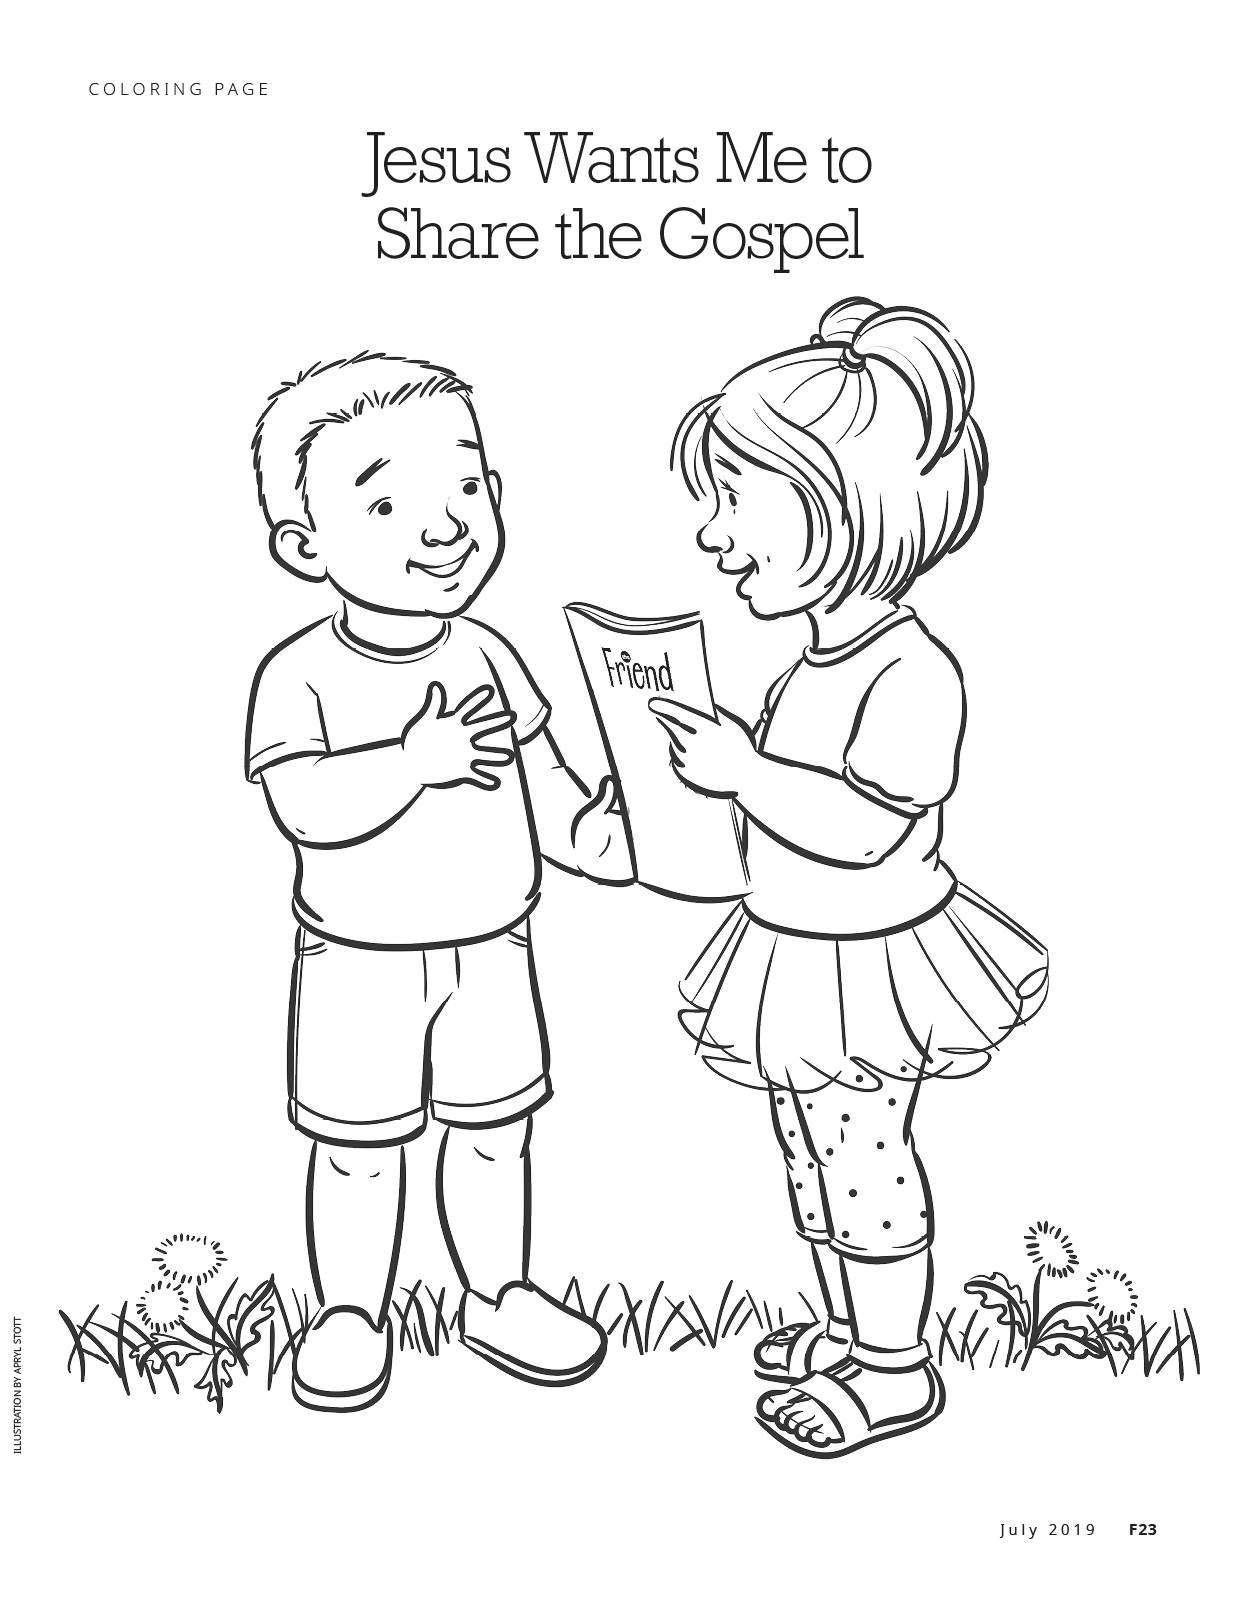 Convert Pictures To Coloring Pages Coloring Pages And Books Coloring Page